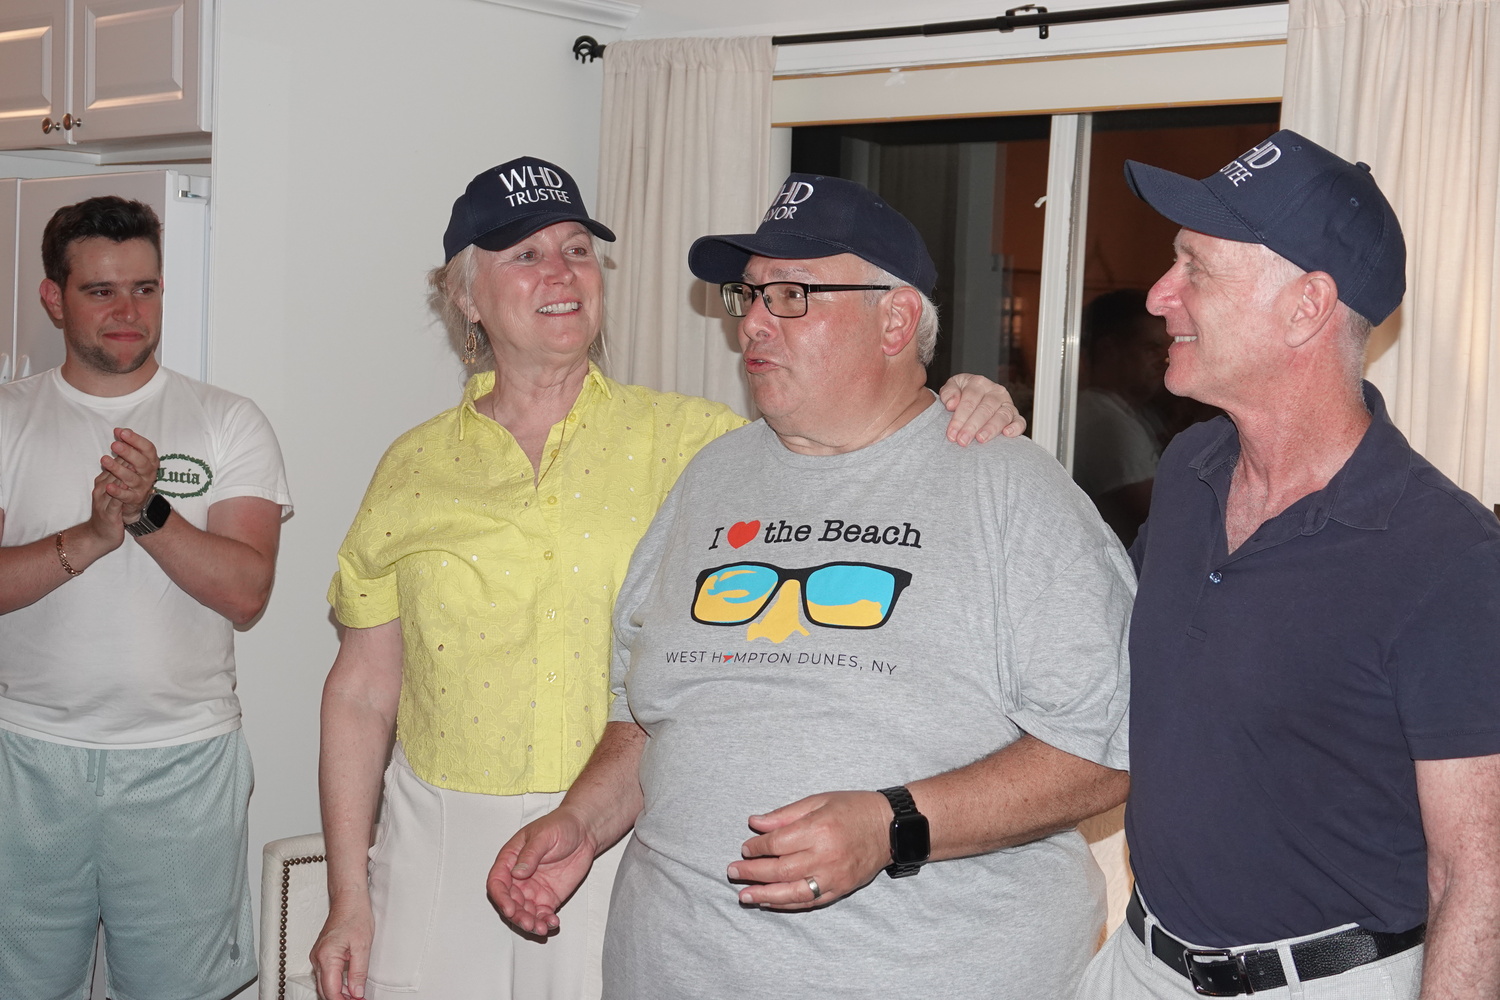 Irwin Krasnow, center, was elected mayor of West Hampton Dunes on Friday night, unseating Gary Vegliante, who has been the village's only mayor since it's incorporation in 1993. His running mates, Regina Mulhearn and Howard Freedman also won election, defeating incumbent village trustees Michael Craig and Harvey Gessin. MICHAEL WRIGHT